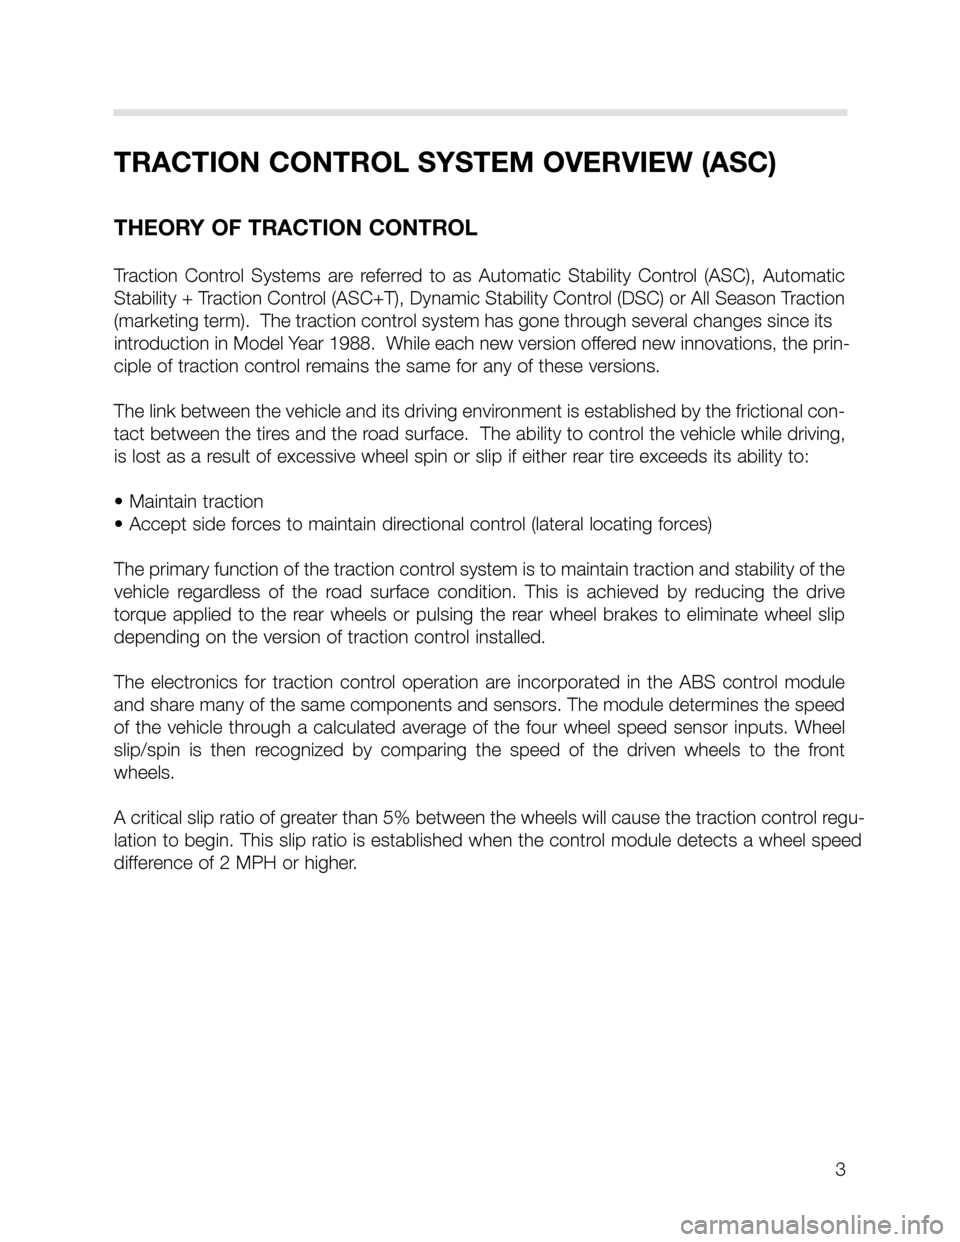 BMW X5 2004 E53 DSC System Workshop Manual 3
TRACTION CONTROL SYSTEM OVERVIEW (ASC)
THEORY OF TRACTION CONTROL
Traction  Control  Systems  are  referred  to  as  Automatic  Stability  Control  (ASC),  Automatic
Stability + Traction Control (AS